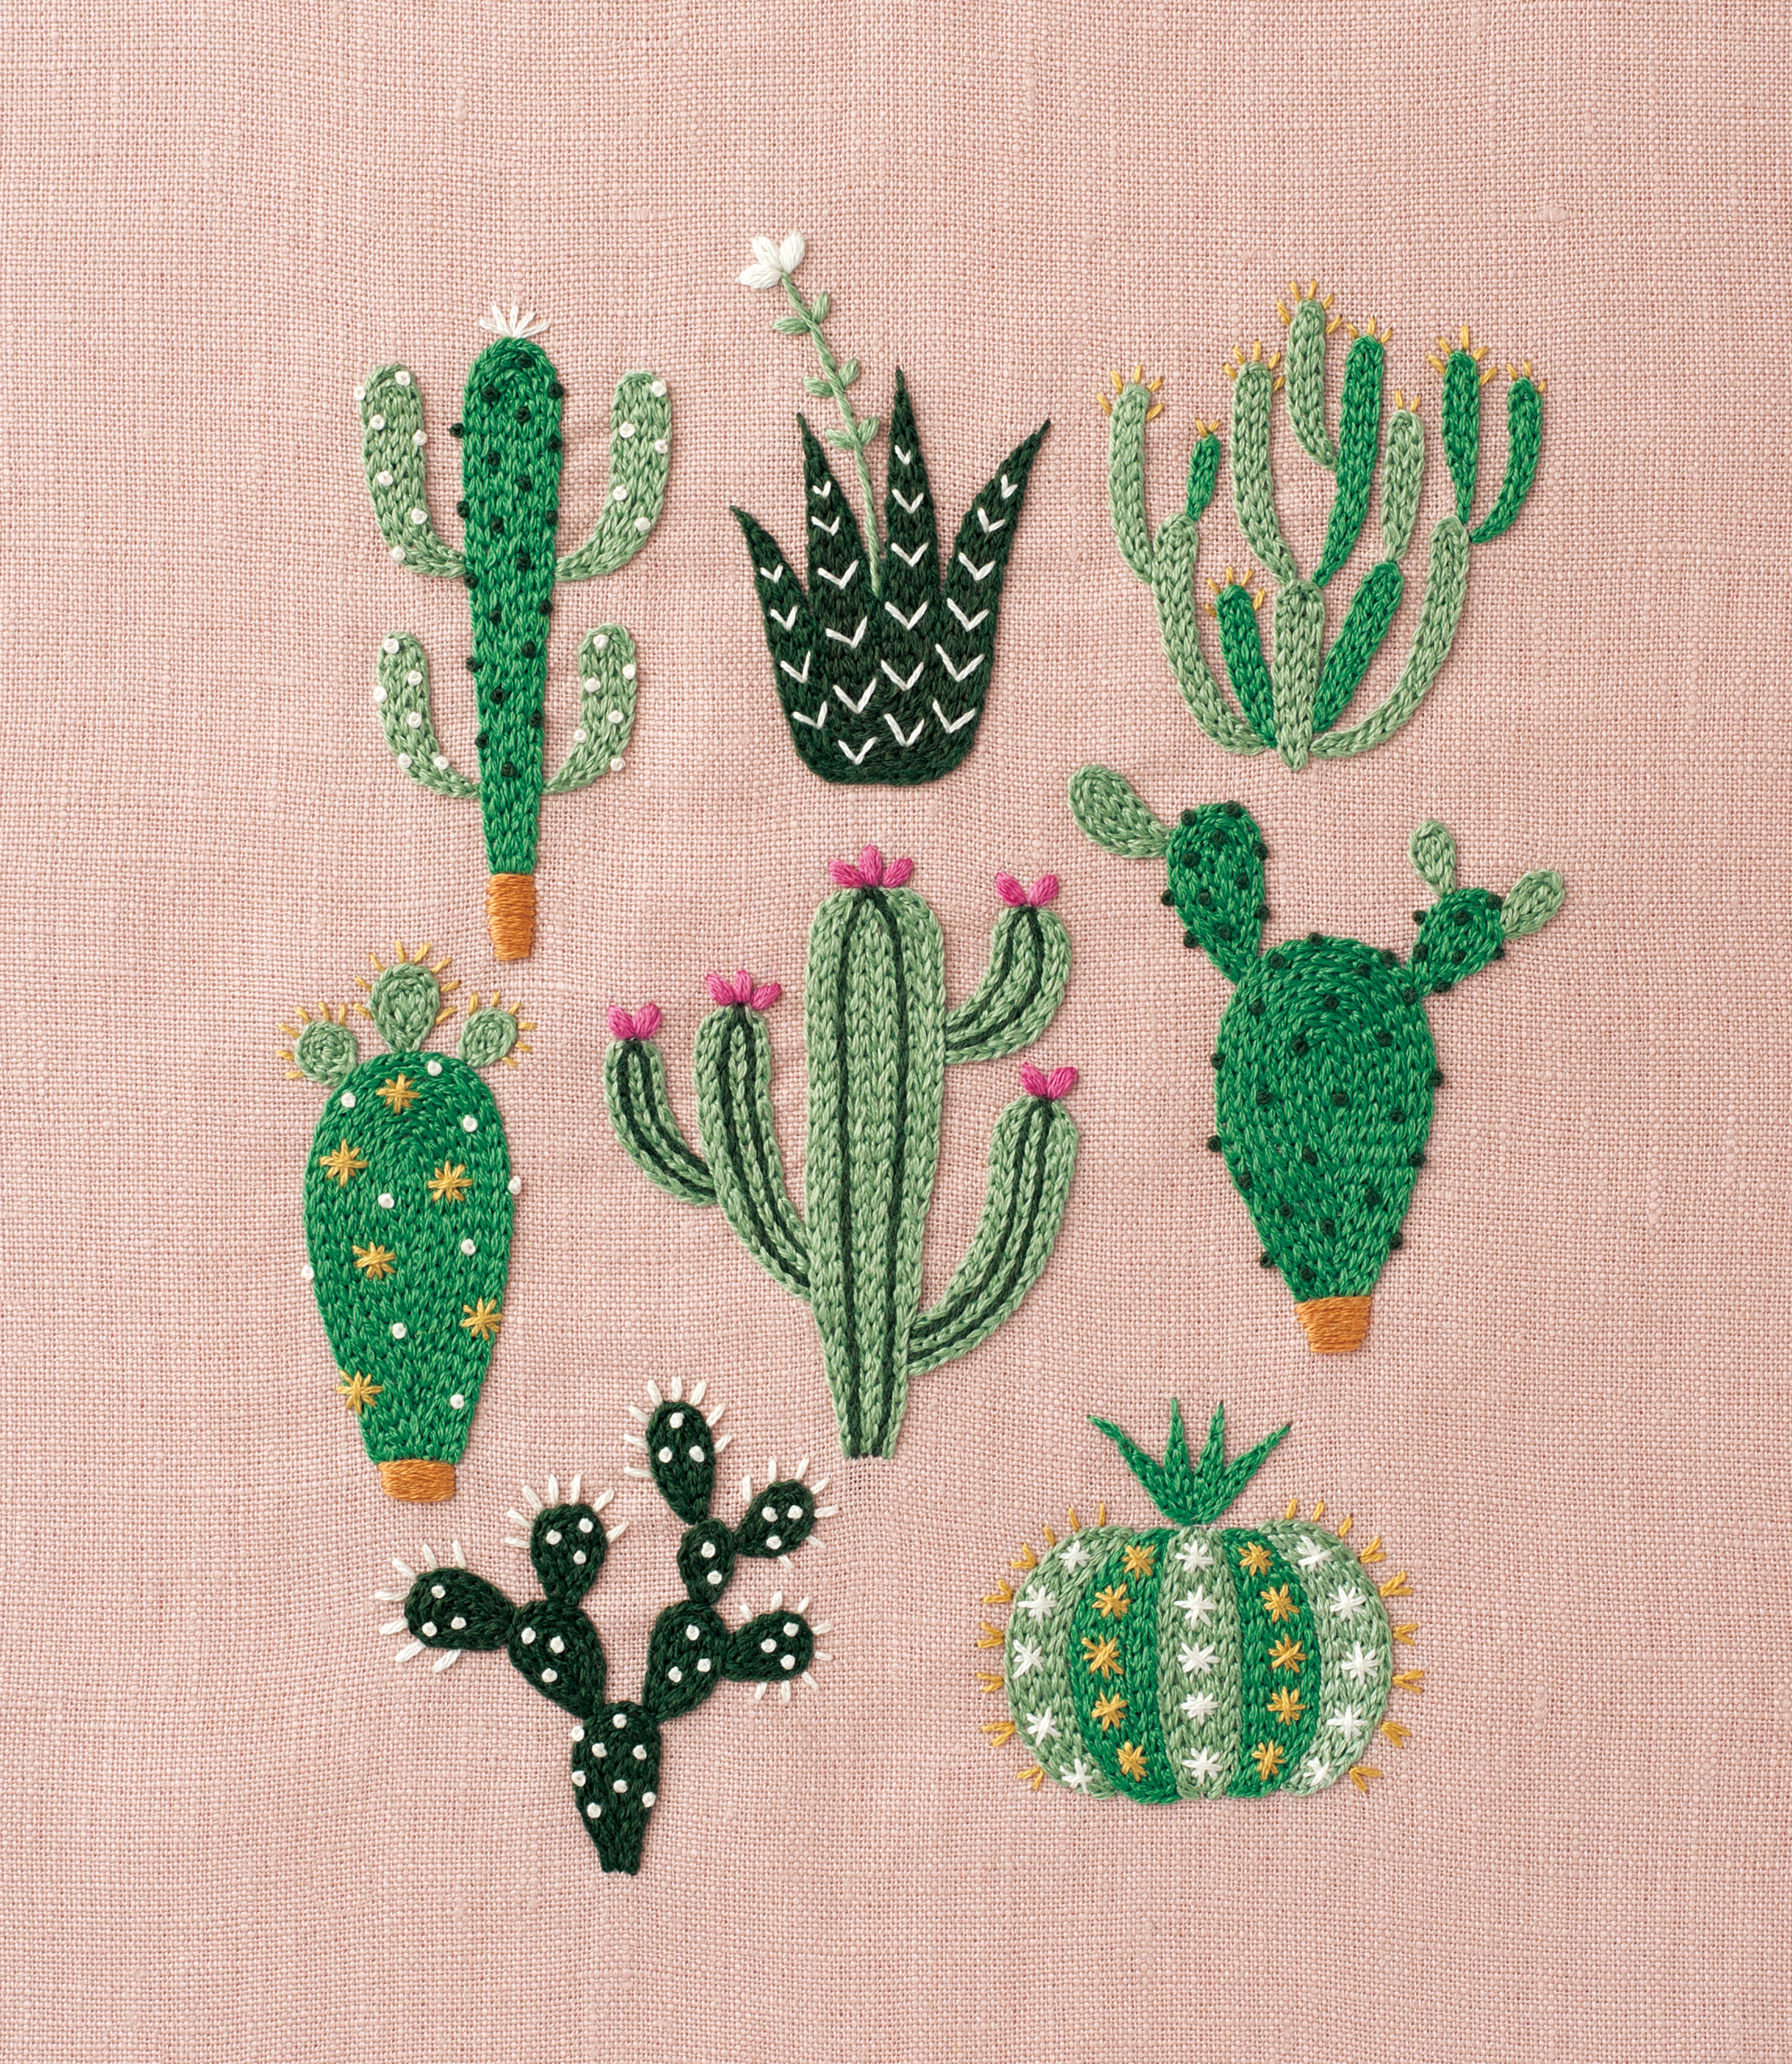 Dmc Embroidery Patterns Diy Floral Cactus Embroidery Projects From A Year Of Embroidery